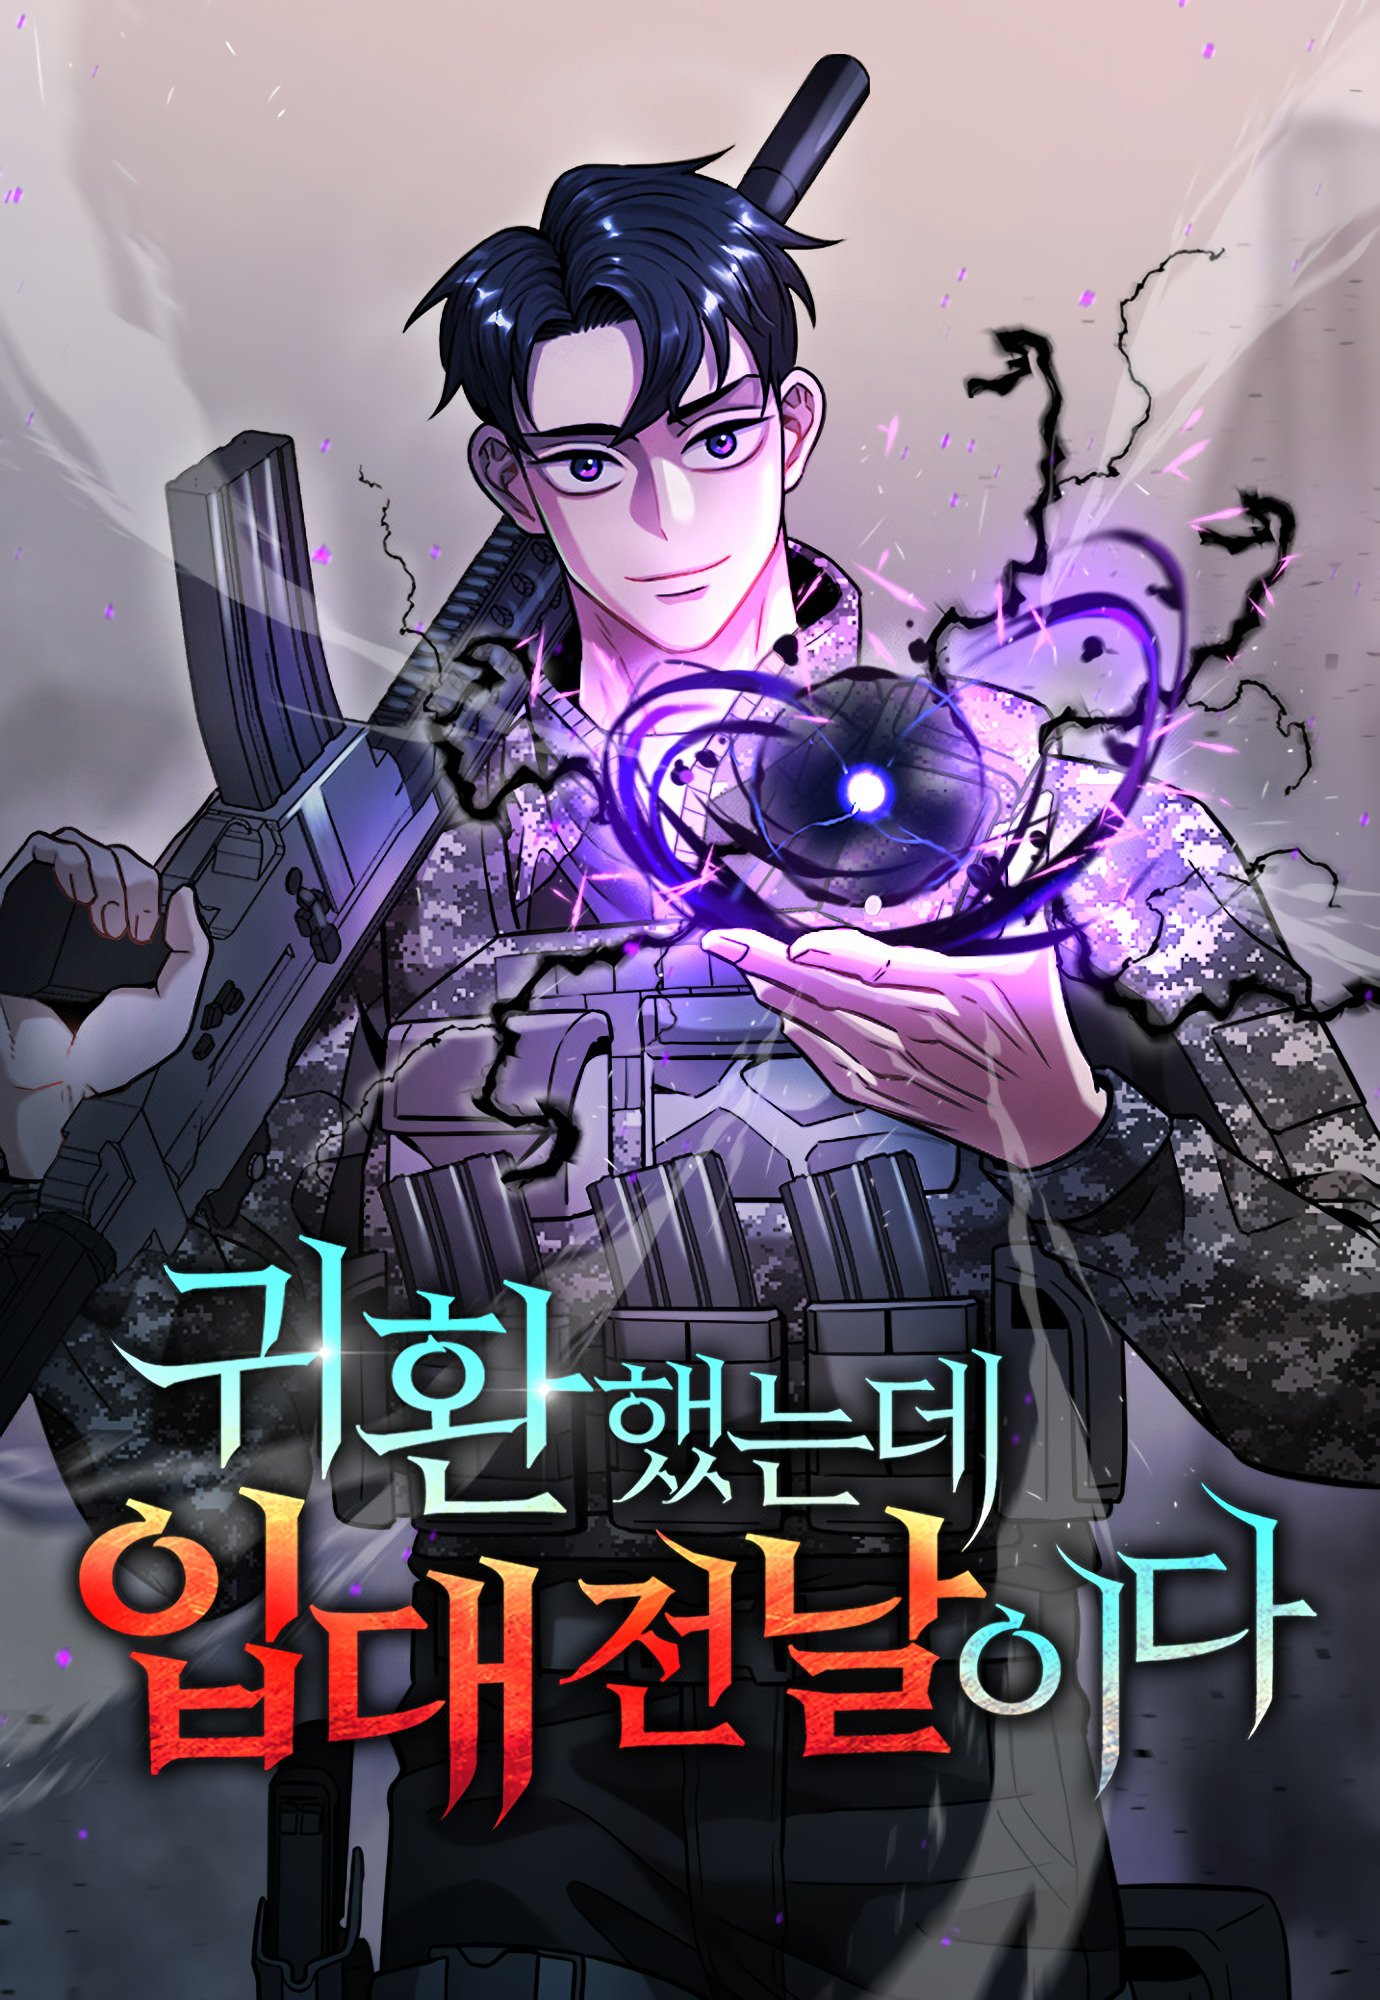 The Dark Mage’s Return to Enlistment